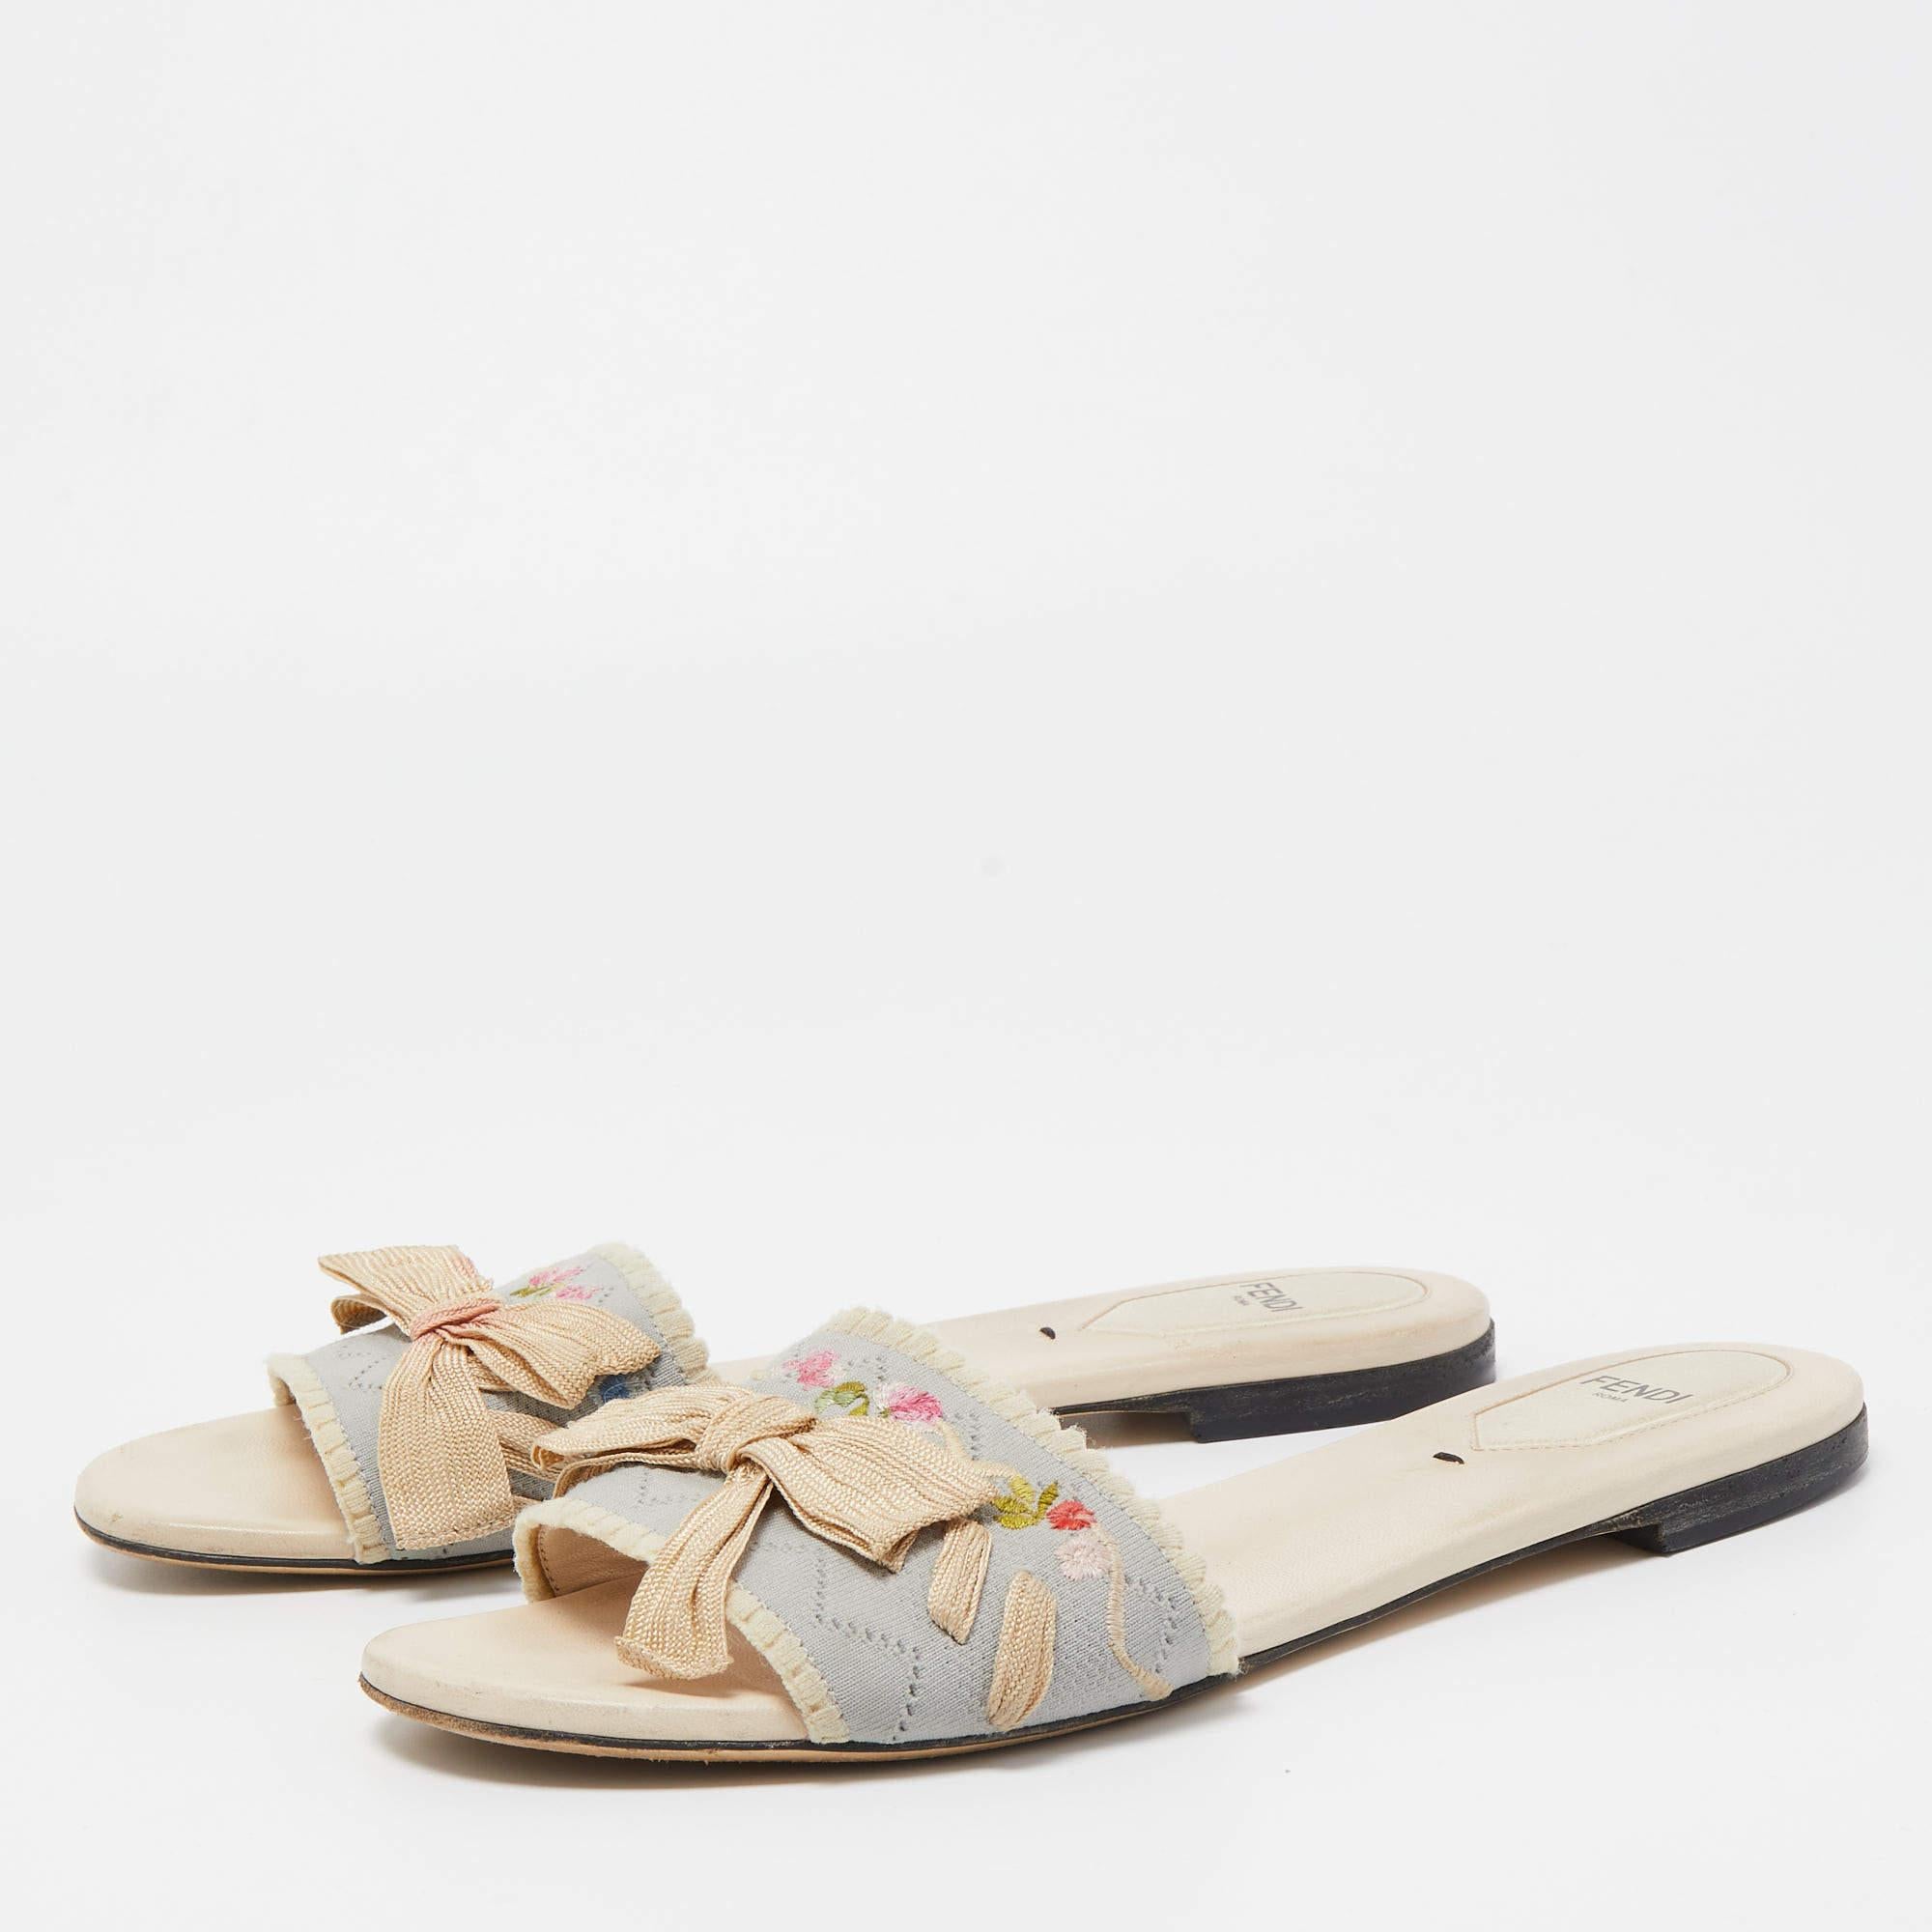 Fendi Cream Flower Embroidered Bow Embellished Flat Slides Size 39.5 In Good Condition For Sale In Dubai, Al Qouz 2